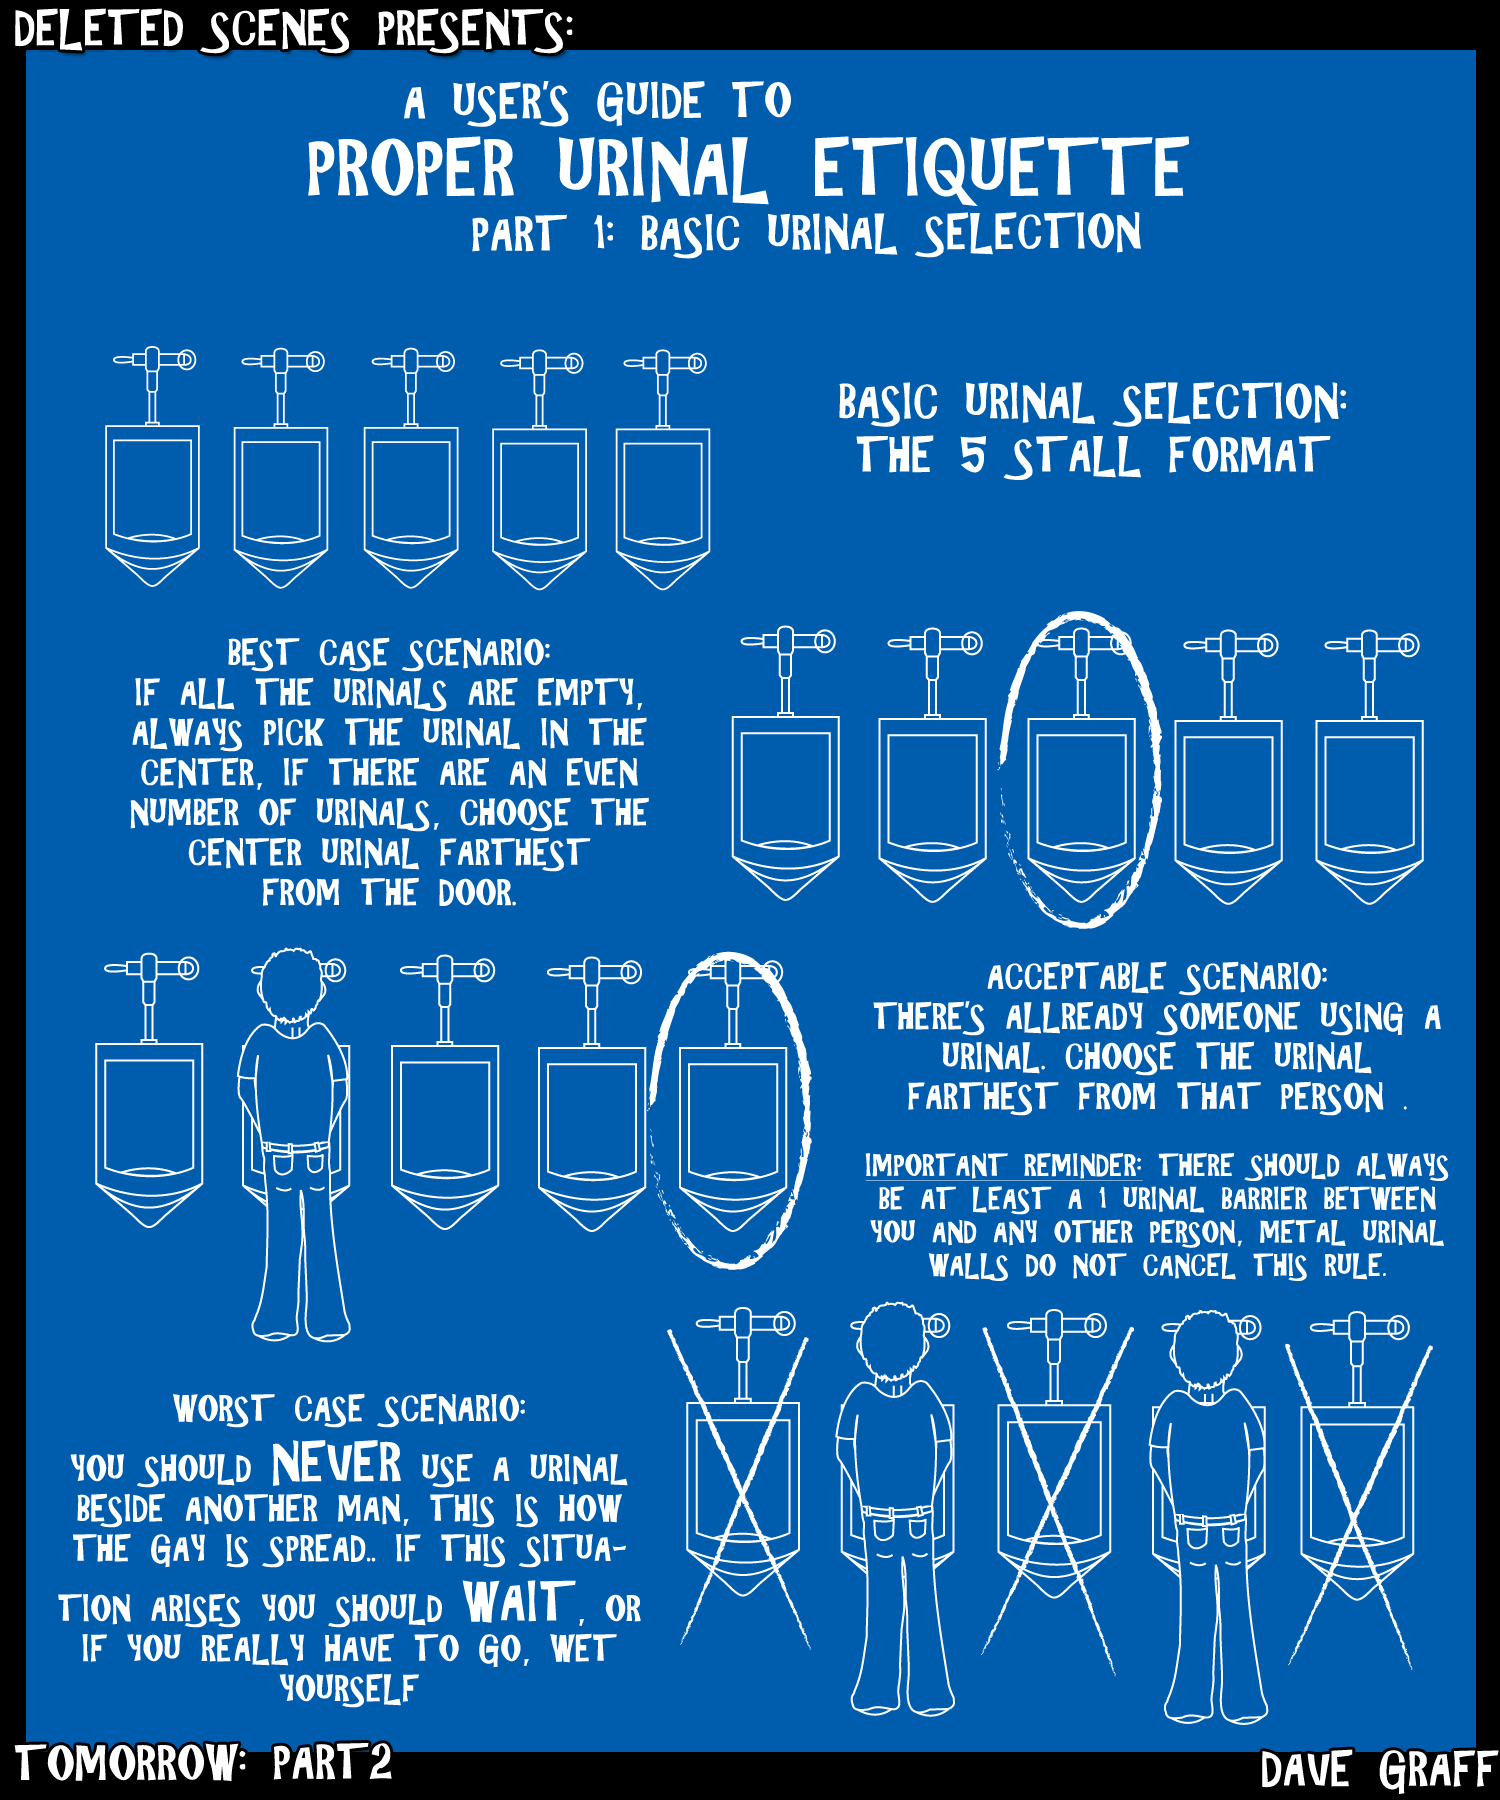 DS_44___Urinal_Etiquette_by_graffd02.png